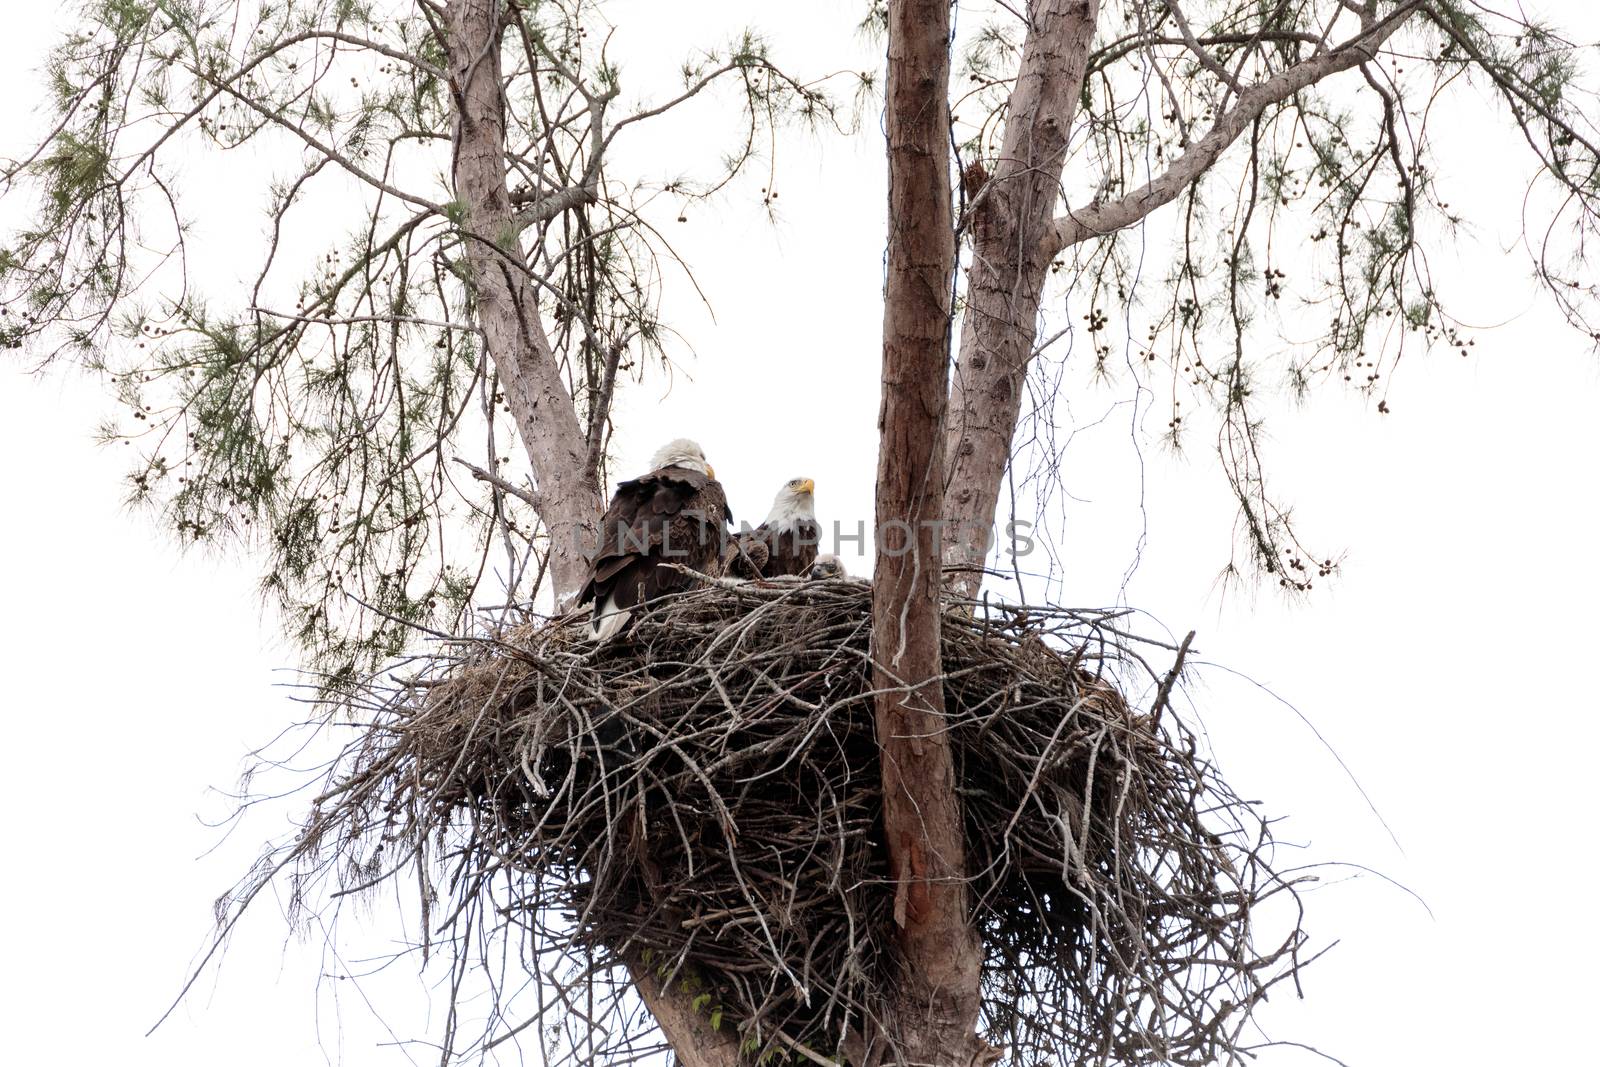 Family of two bald eagle Haliaeetus leucocephalus parents with t by steffstarr